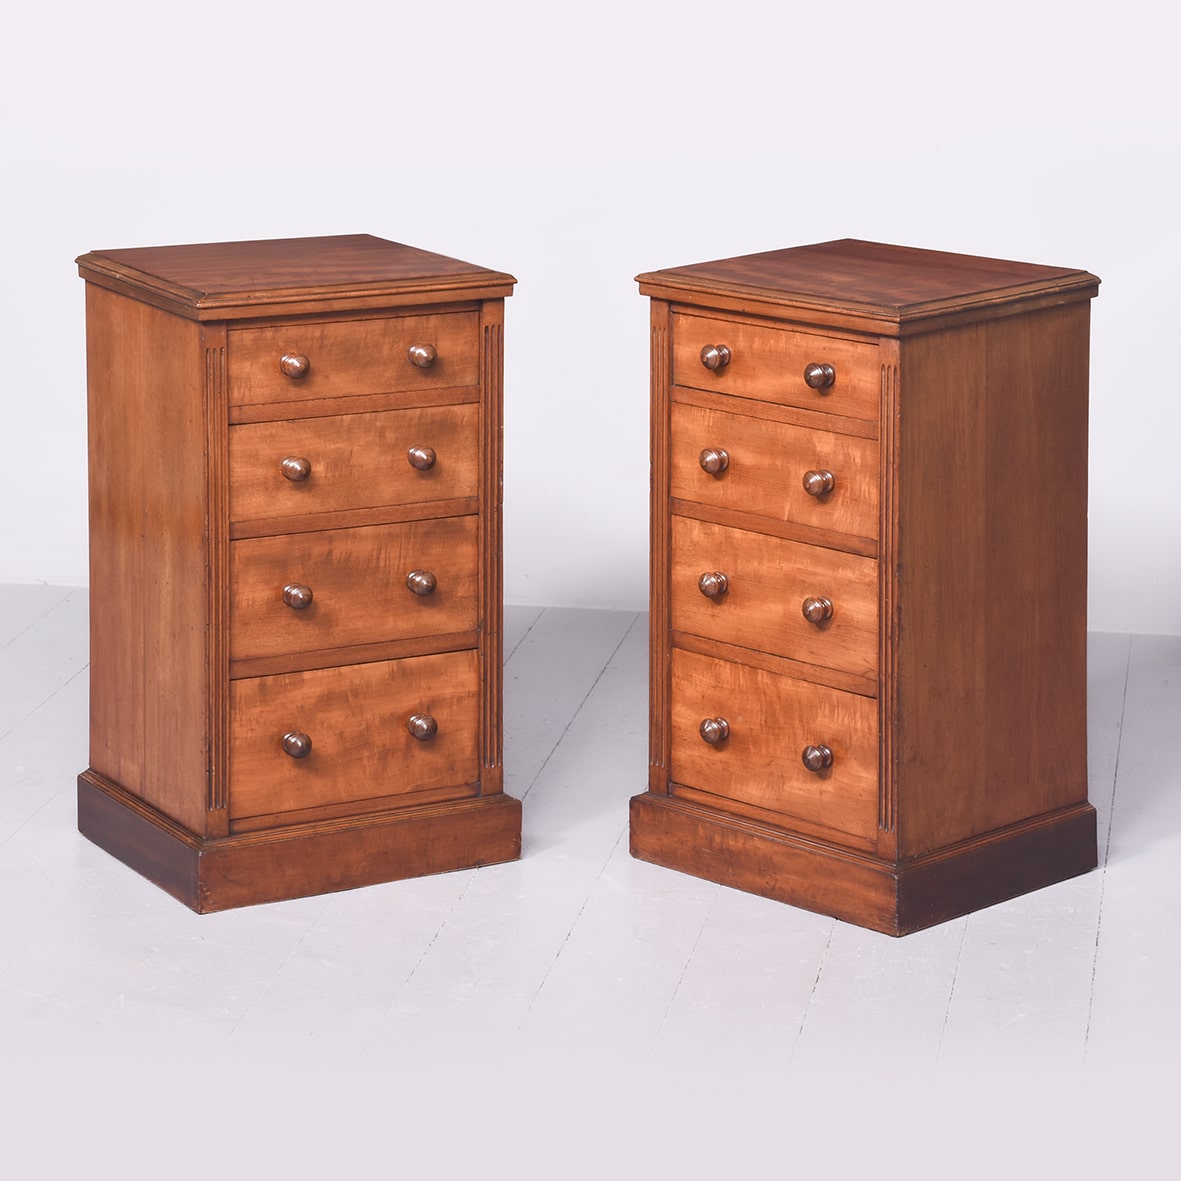 Pair of Fine Quality Mid-Victorian Neat-Sized Chests of Drawers/Bedside Lockers antique chest of drawers Antique Chest Of Drawers